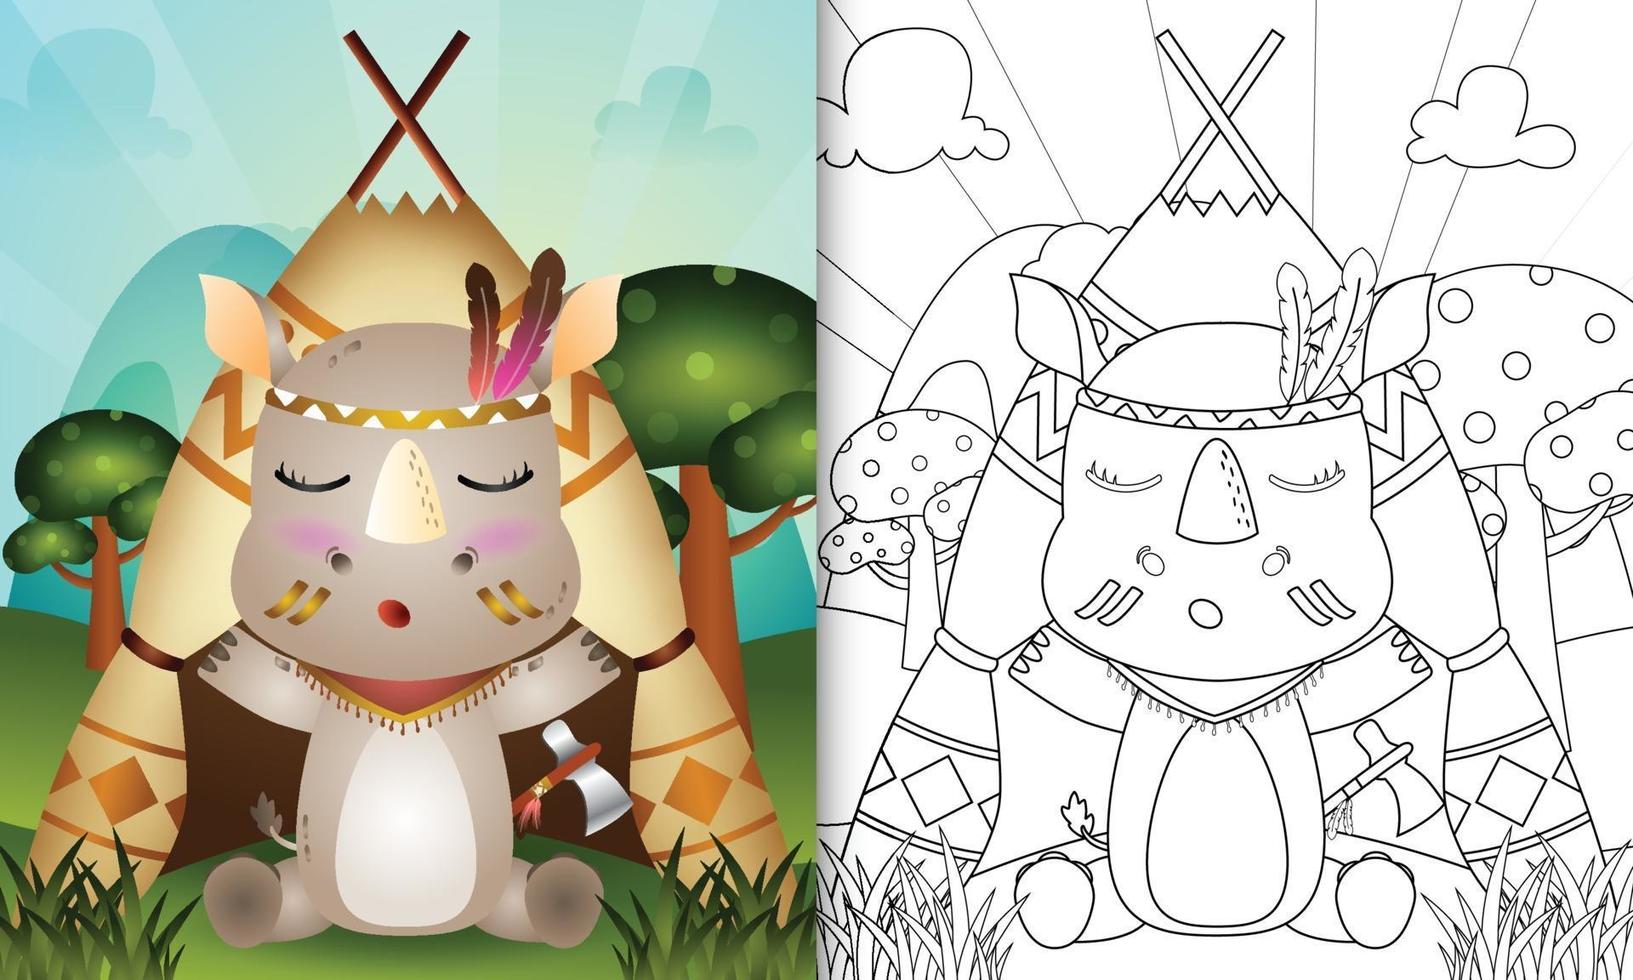 Coloring book template for kids with a cute tribal boho rhino character illustration vector